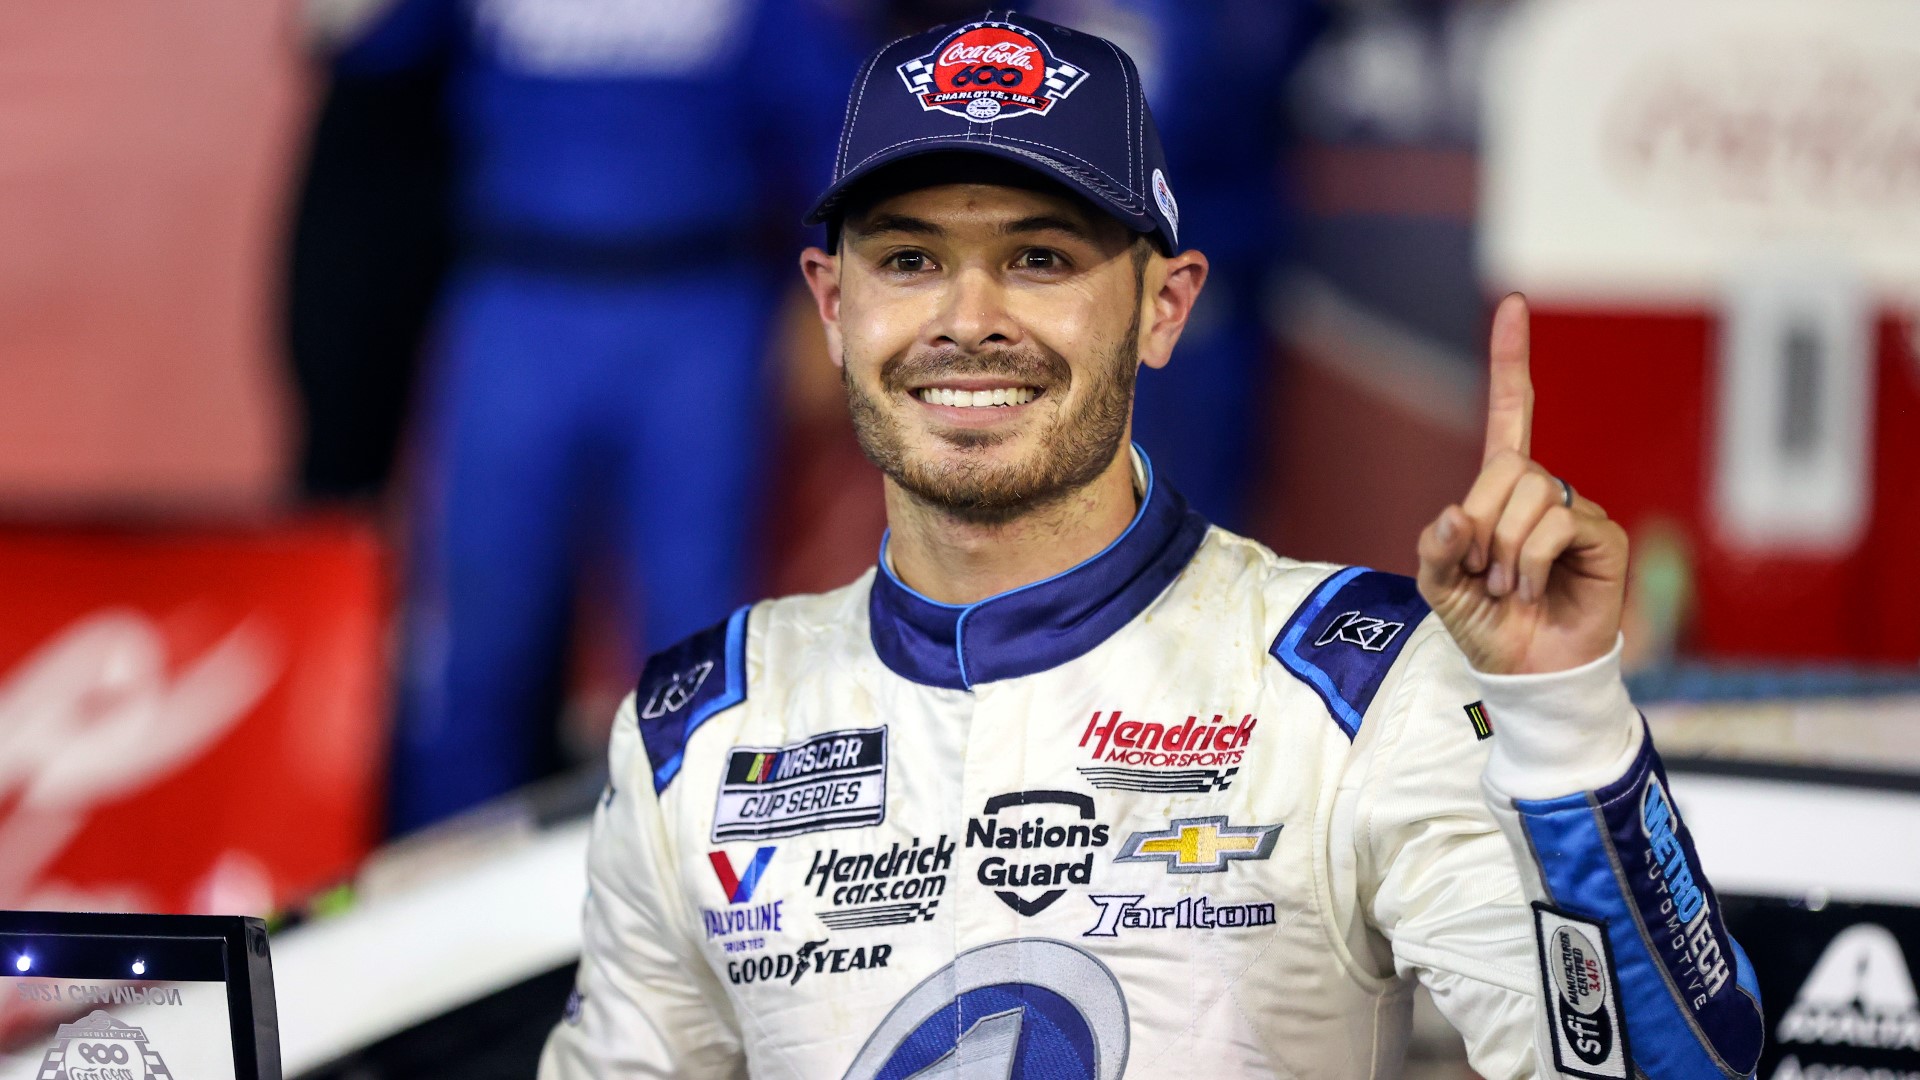 Heading into Indianapolis, Kyle Larson is the hottest driver in NASCAR with 5 wins. He discusses that, plus the inaugural Indy road race in the Cup Series.